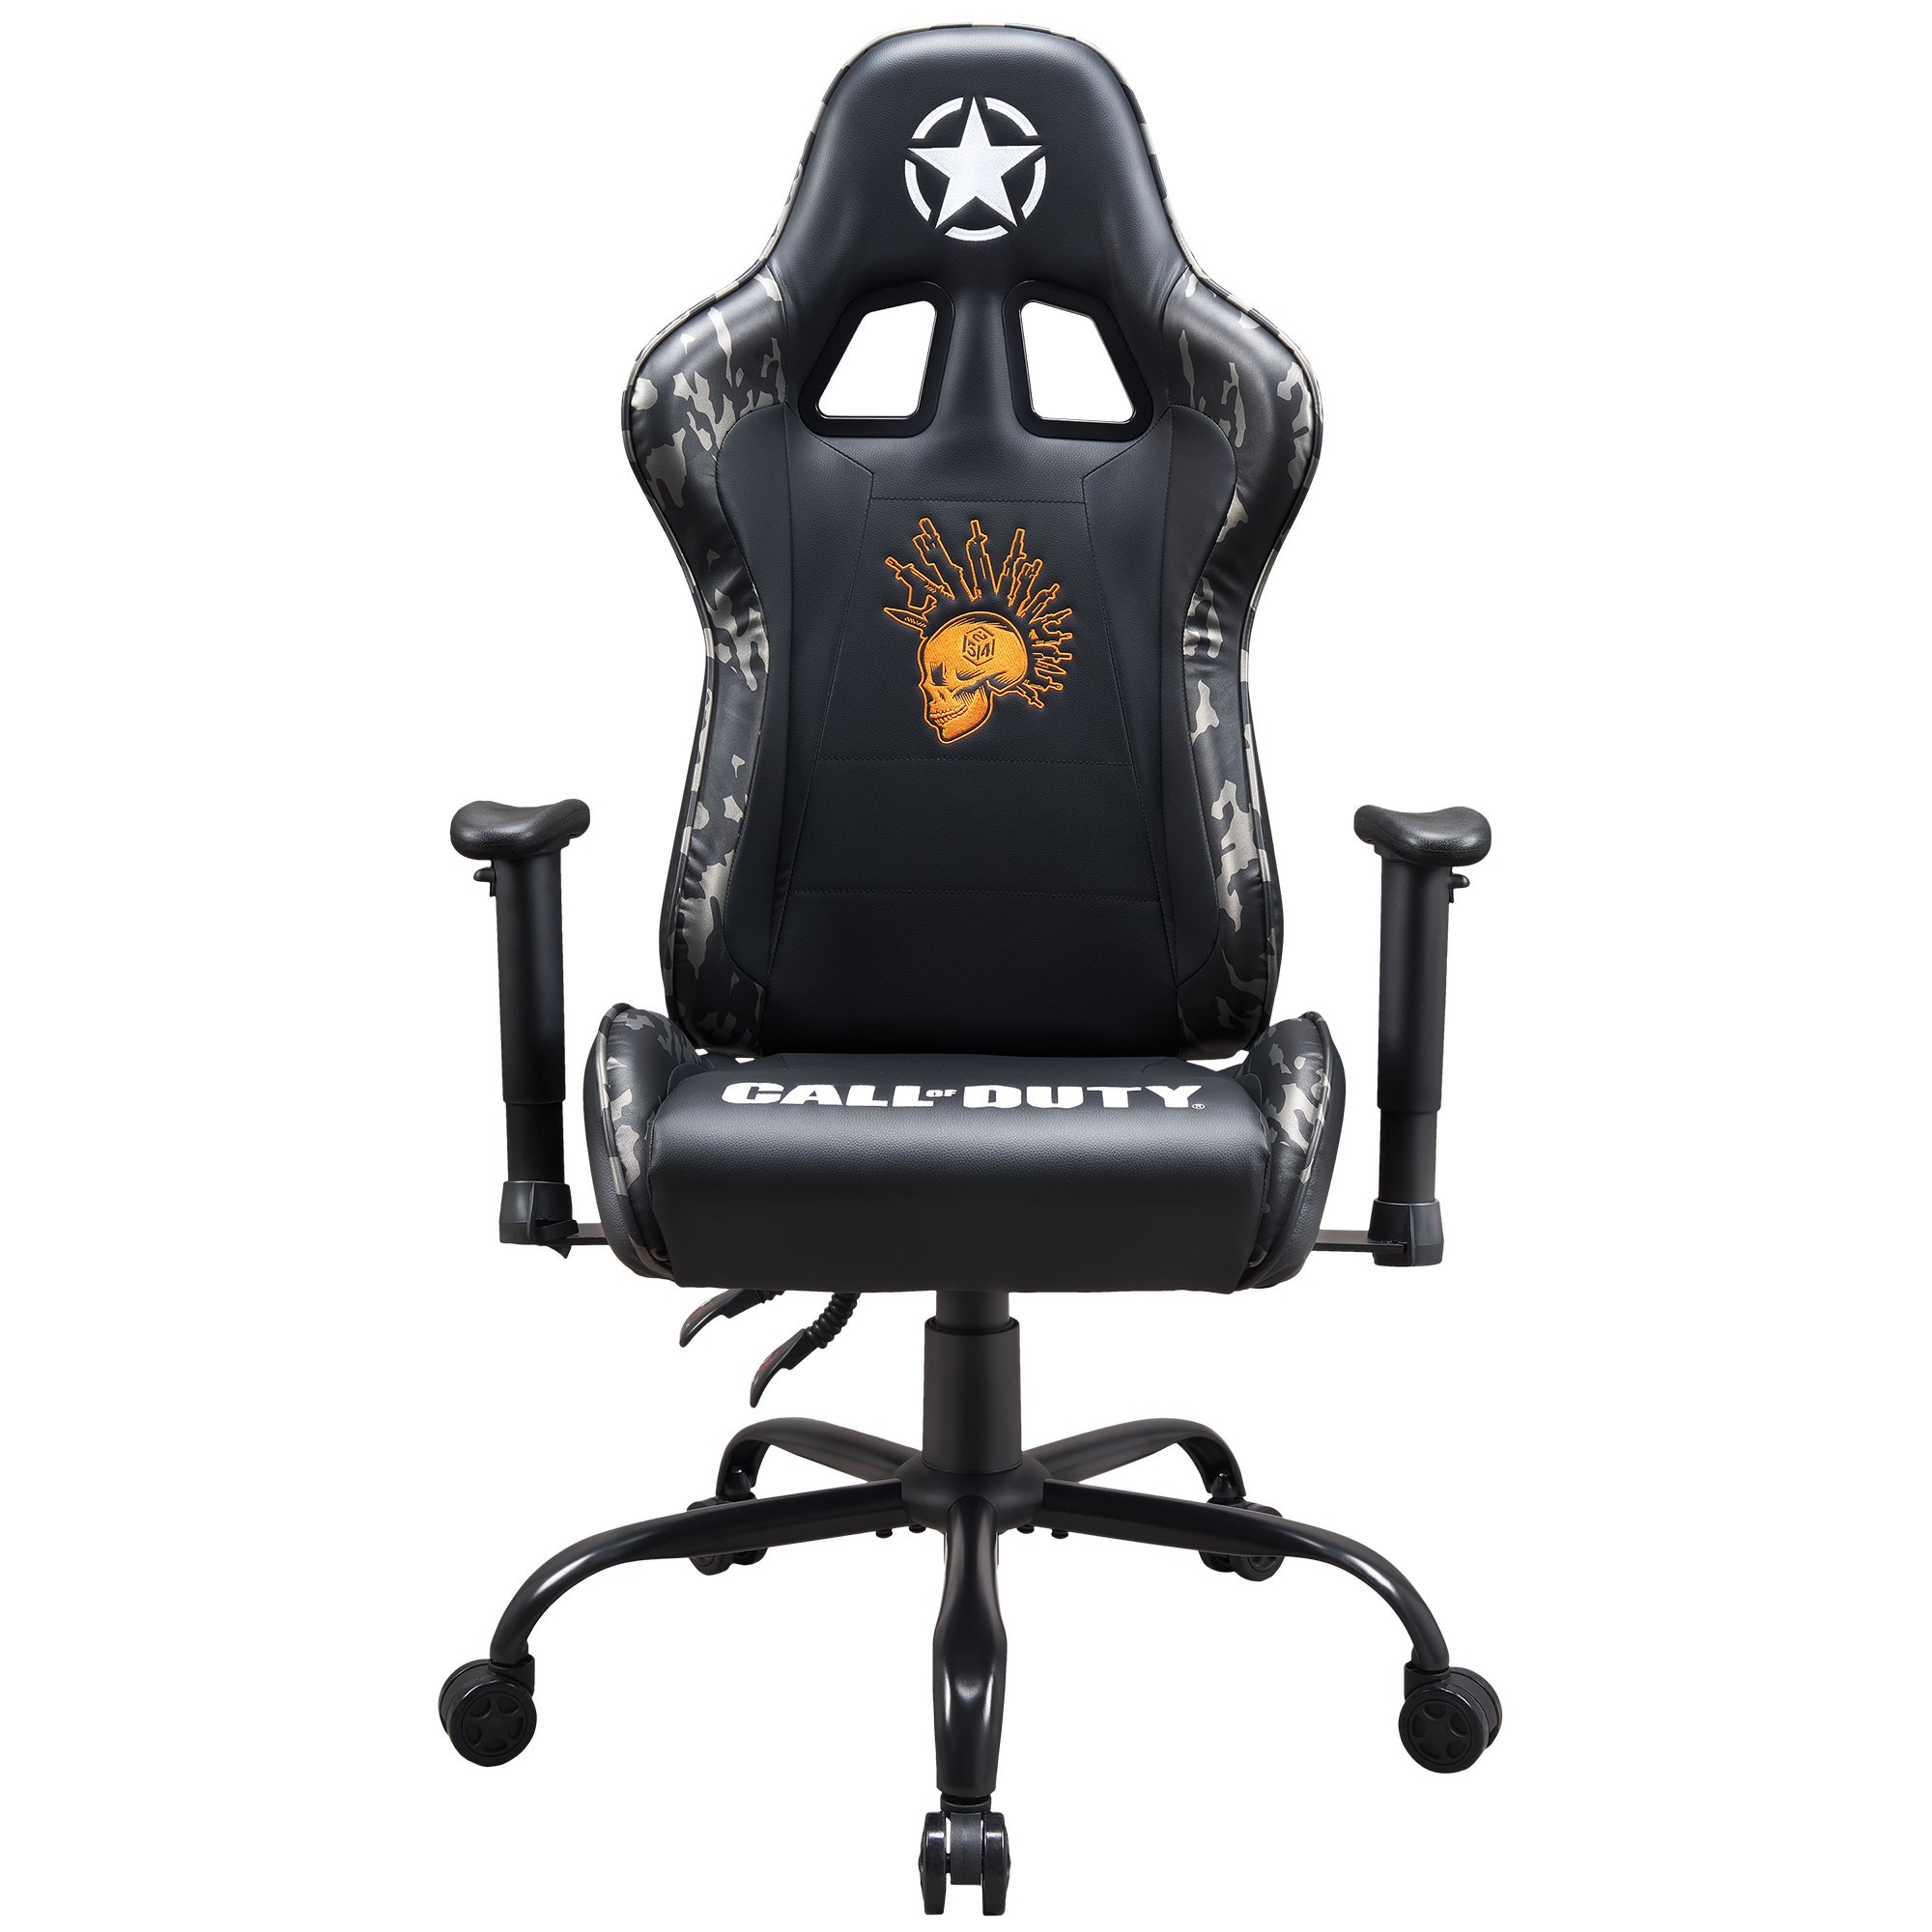 Chaise gaming : les meilleurs chaises pour gamers